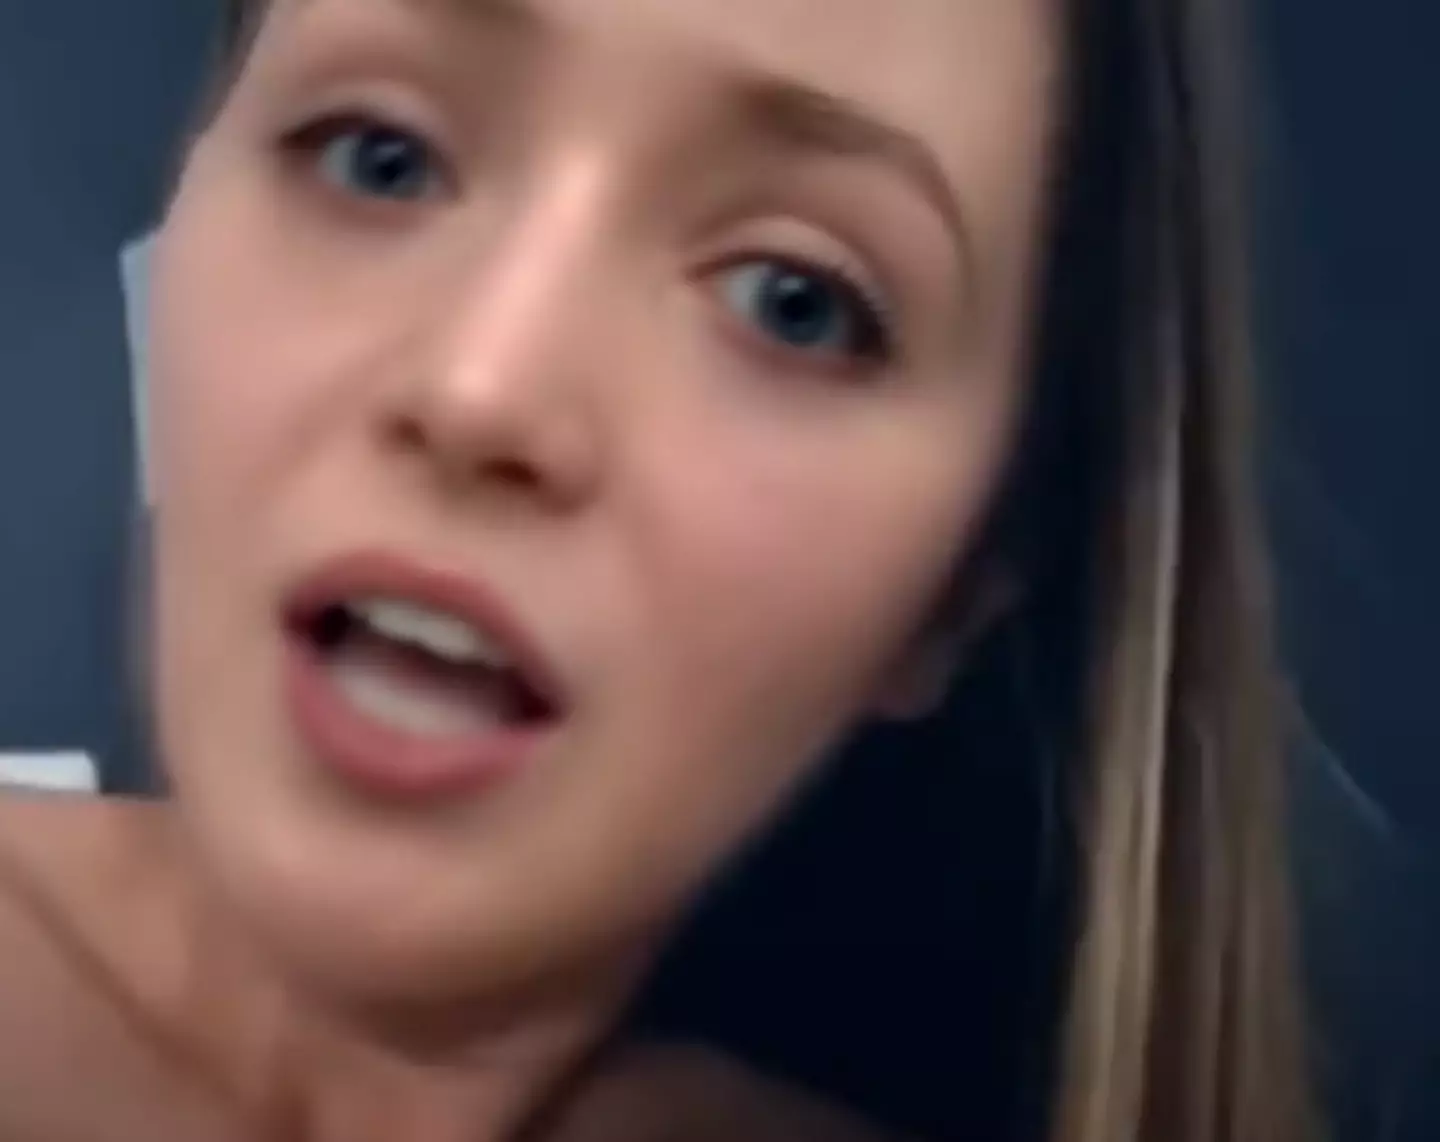 Taylor's face had been inserted into a pornographic video.